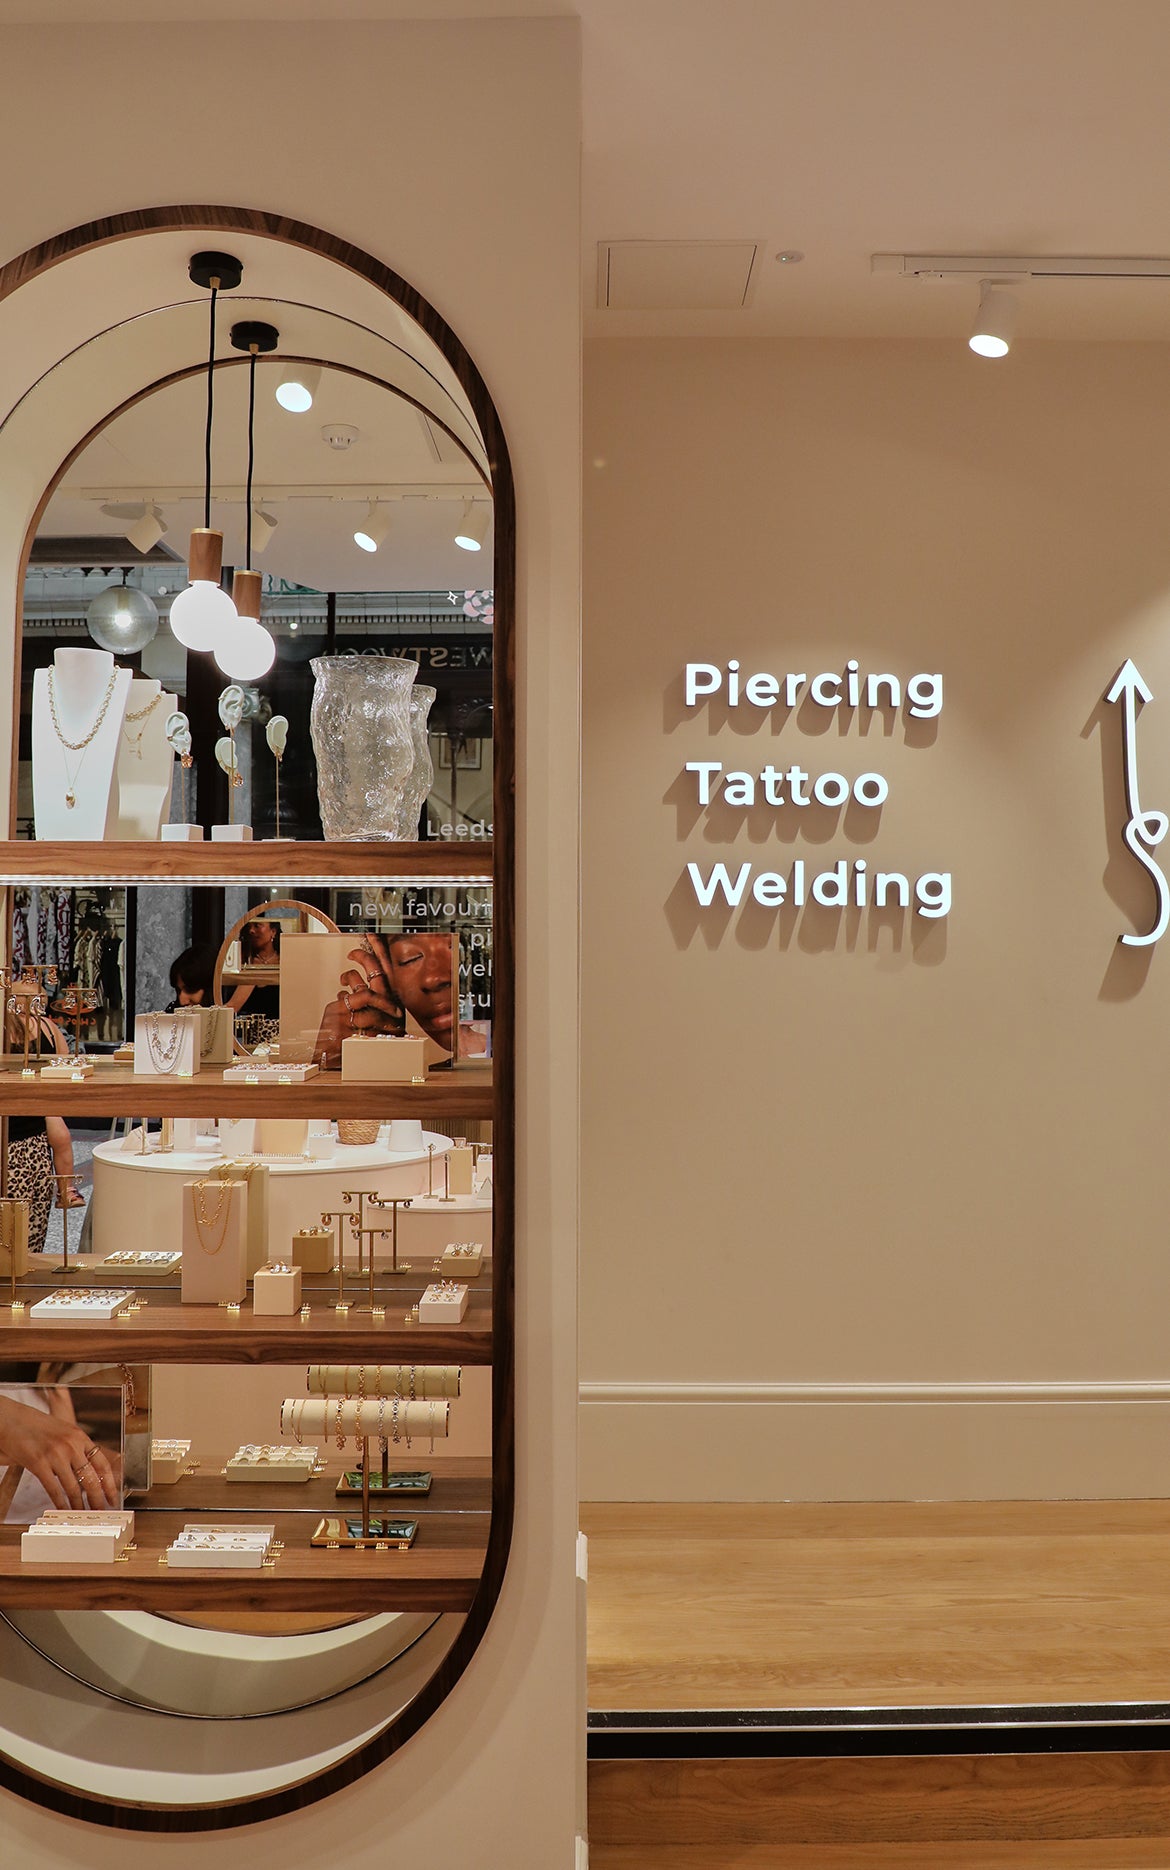 Tattoo, Welding and Piercing sign in-store